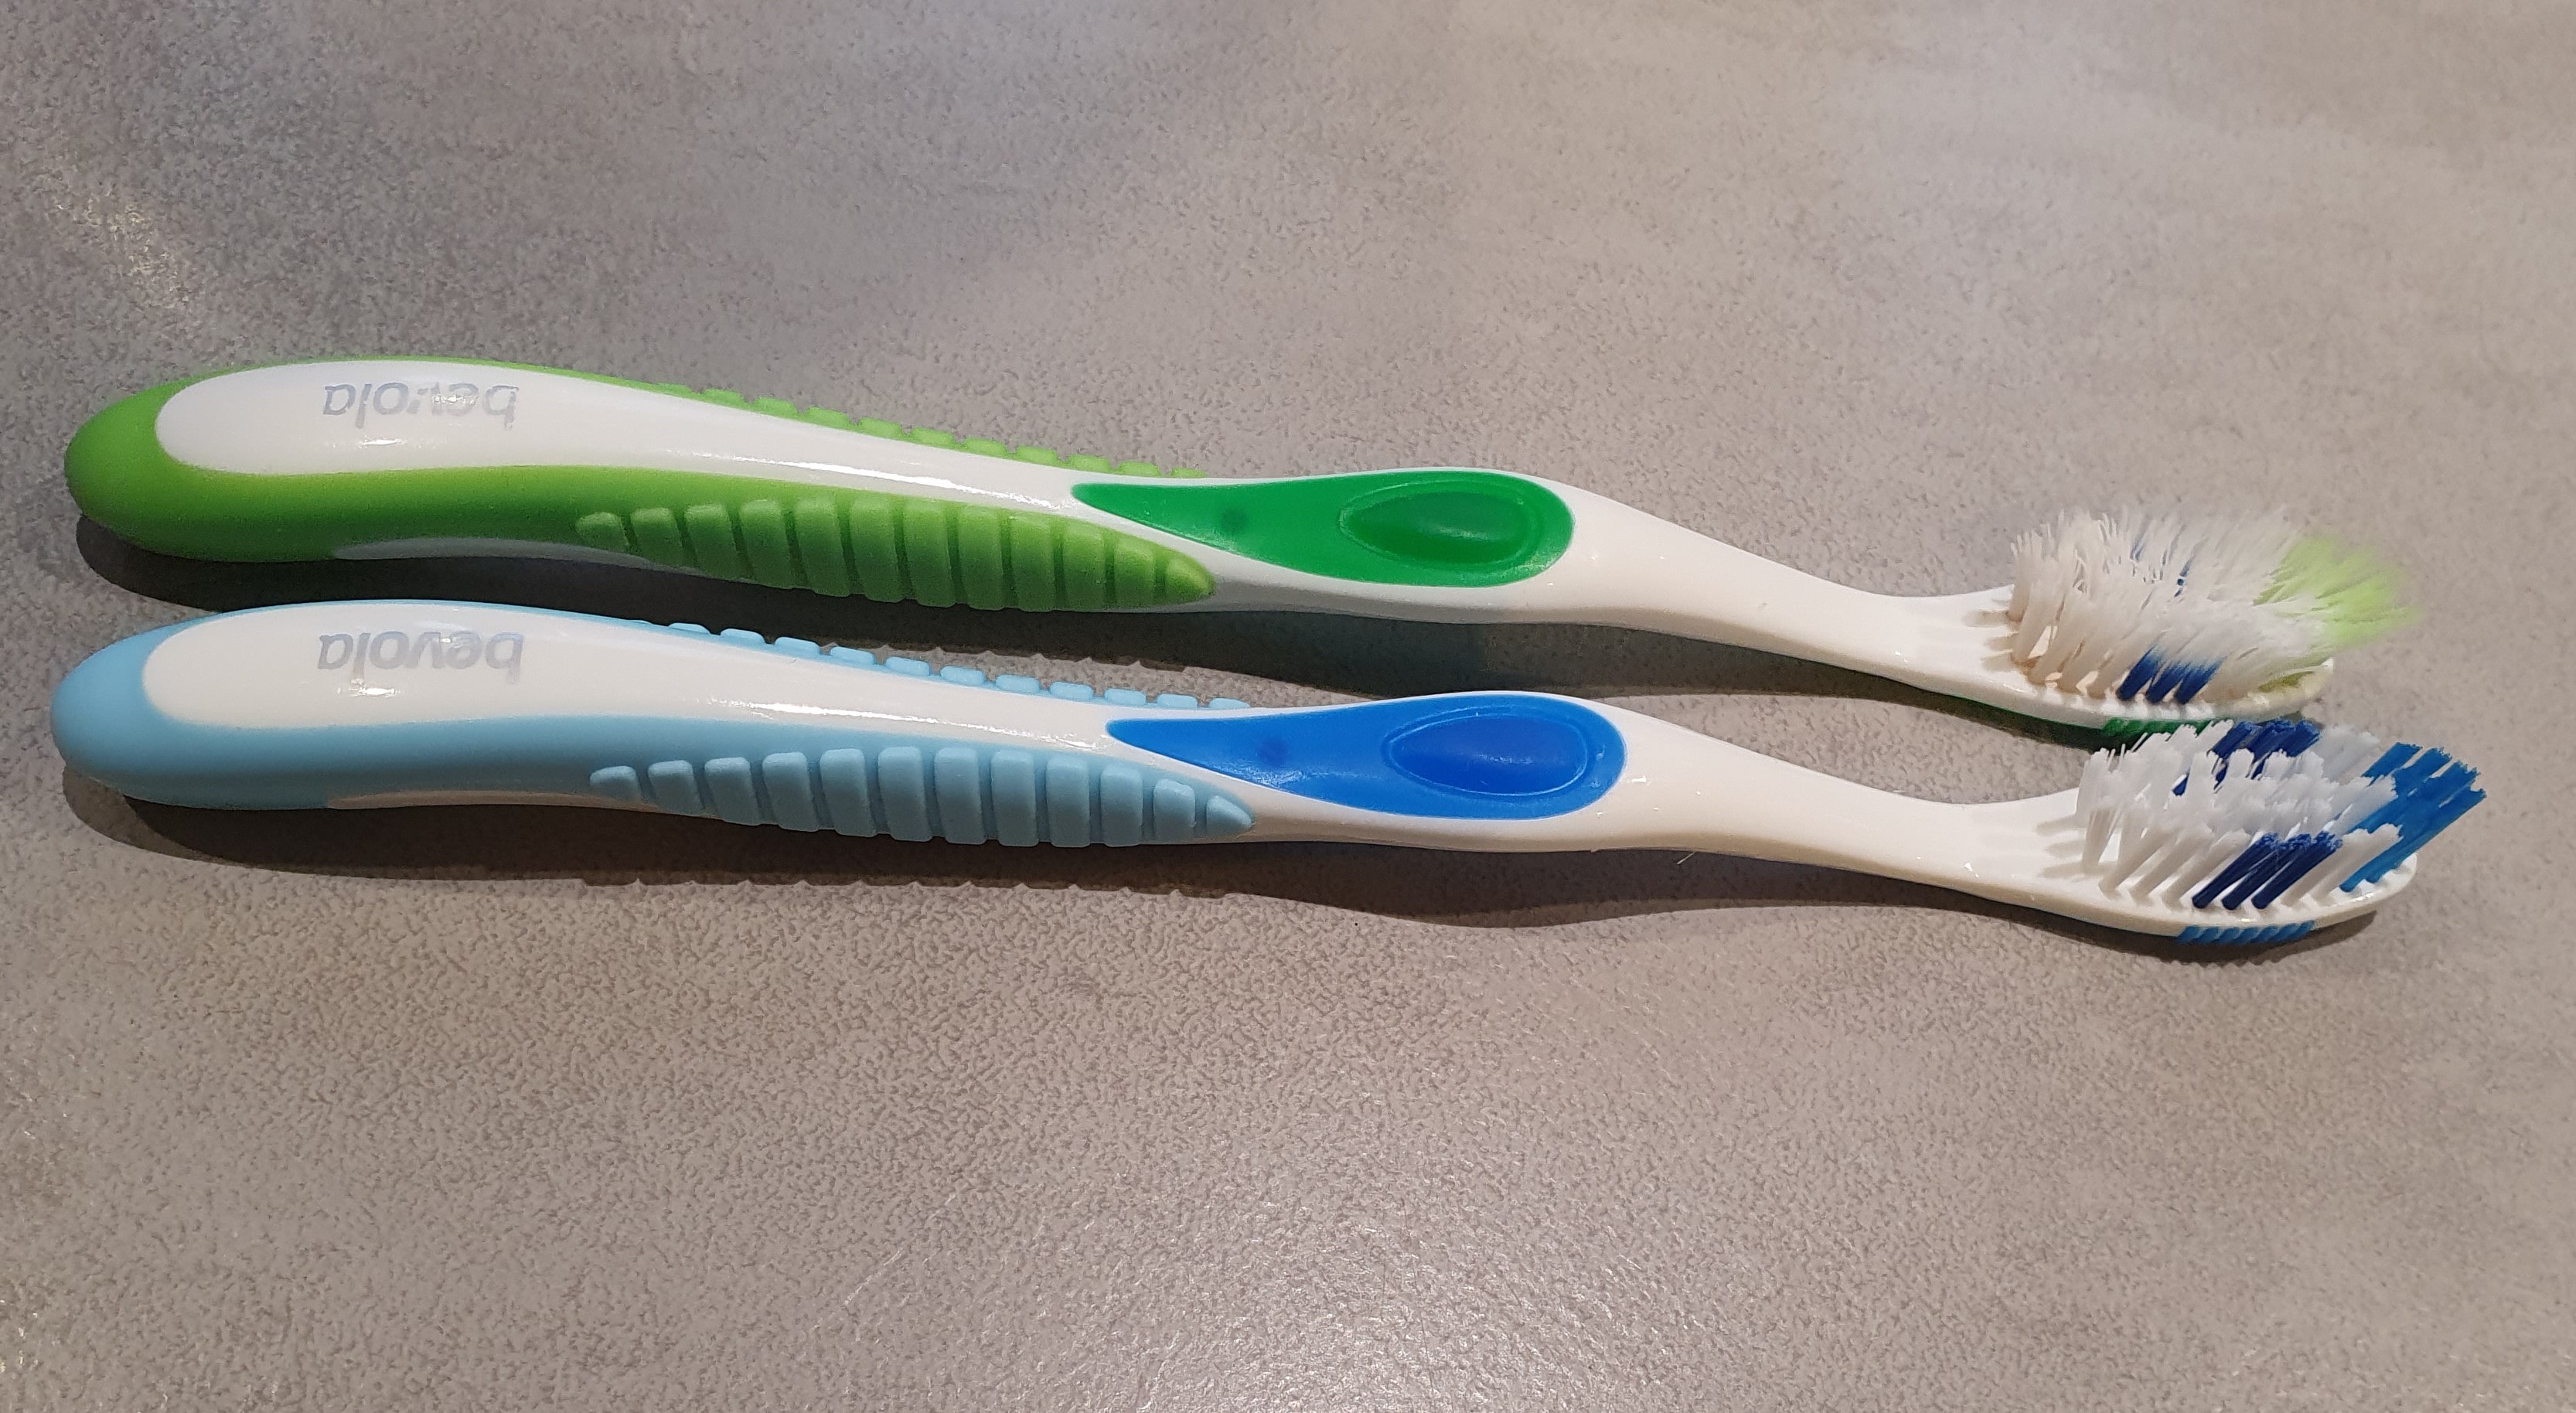 <image: old and new toothbrushes>